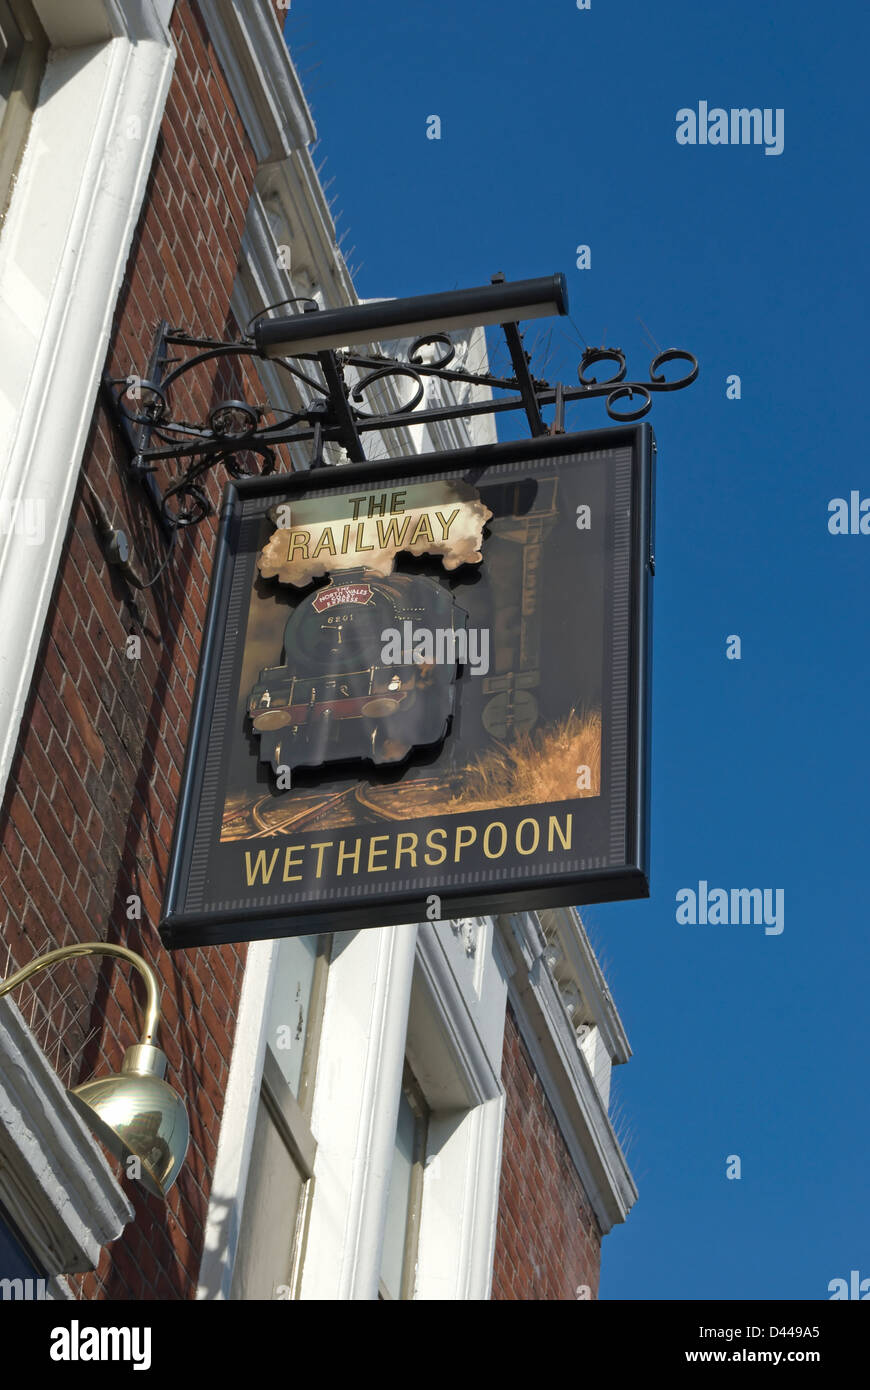 pub sign for the railway, part of the wetherspoon pub chain, in putney, southwest london, england Stock Photo